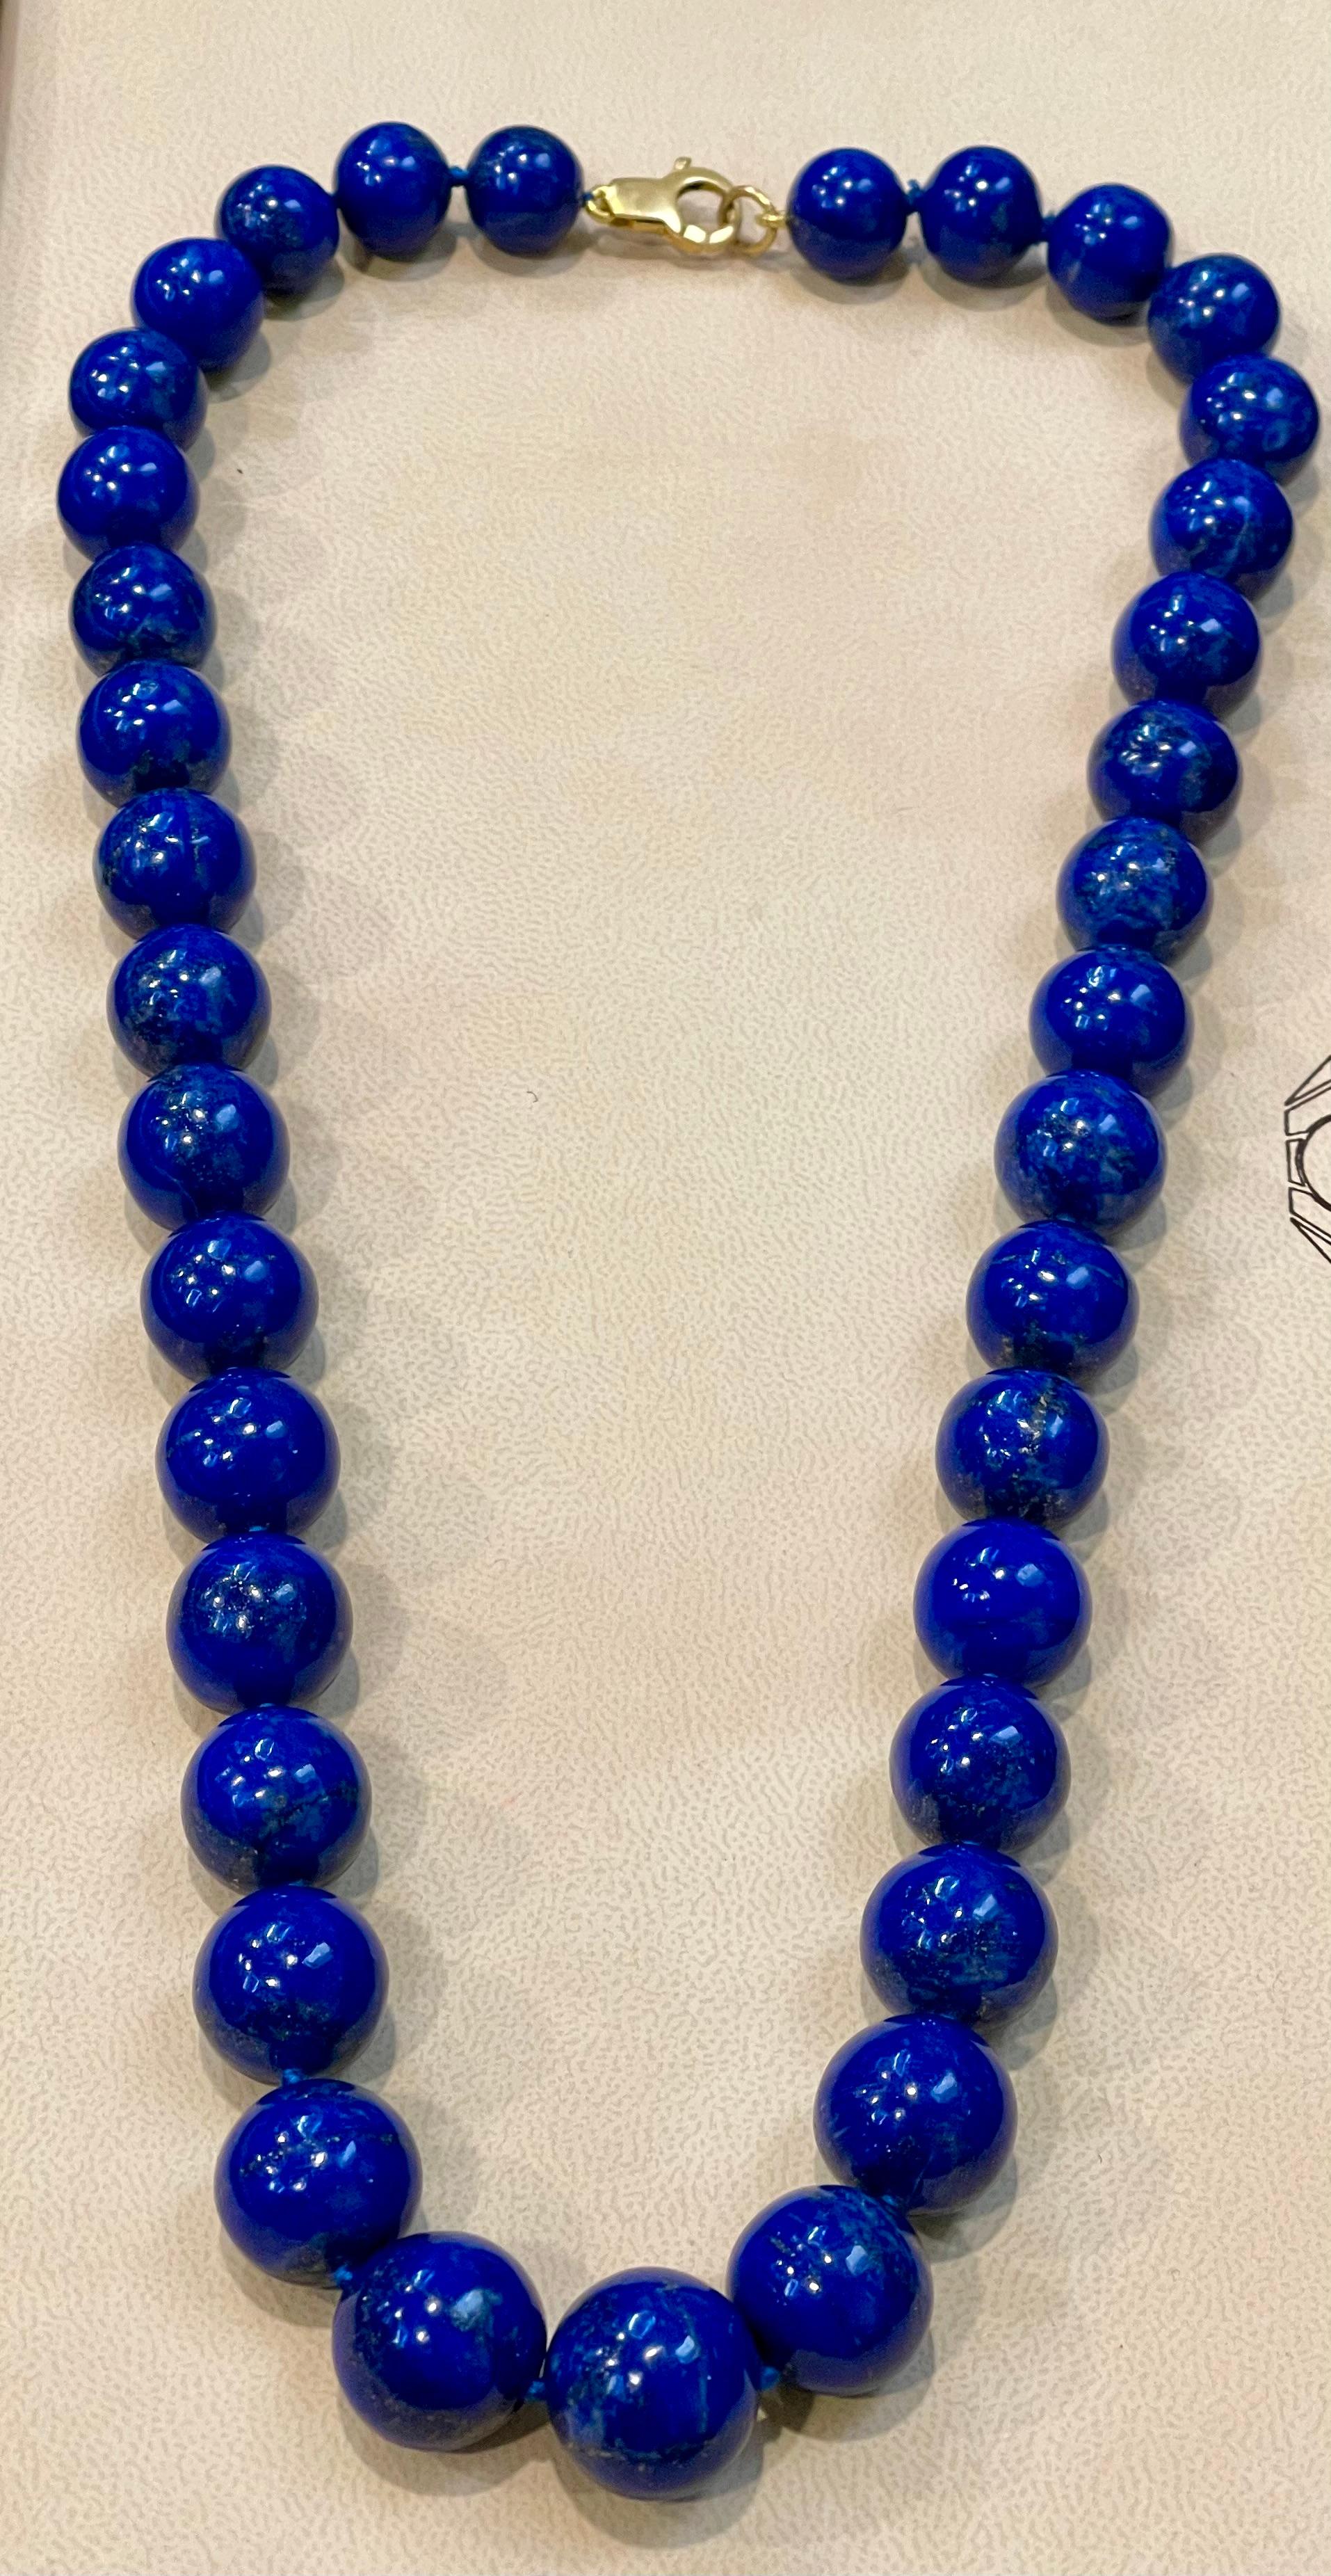 Vintage Lapis Lazuli Single Strand Necklace with 14 Karat Yellow Gold Lobster For Sale 1